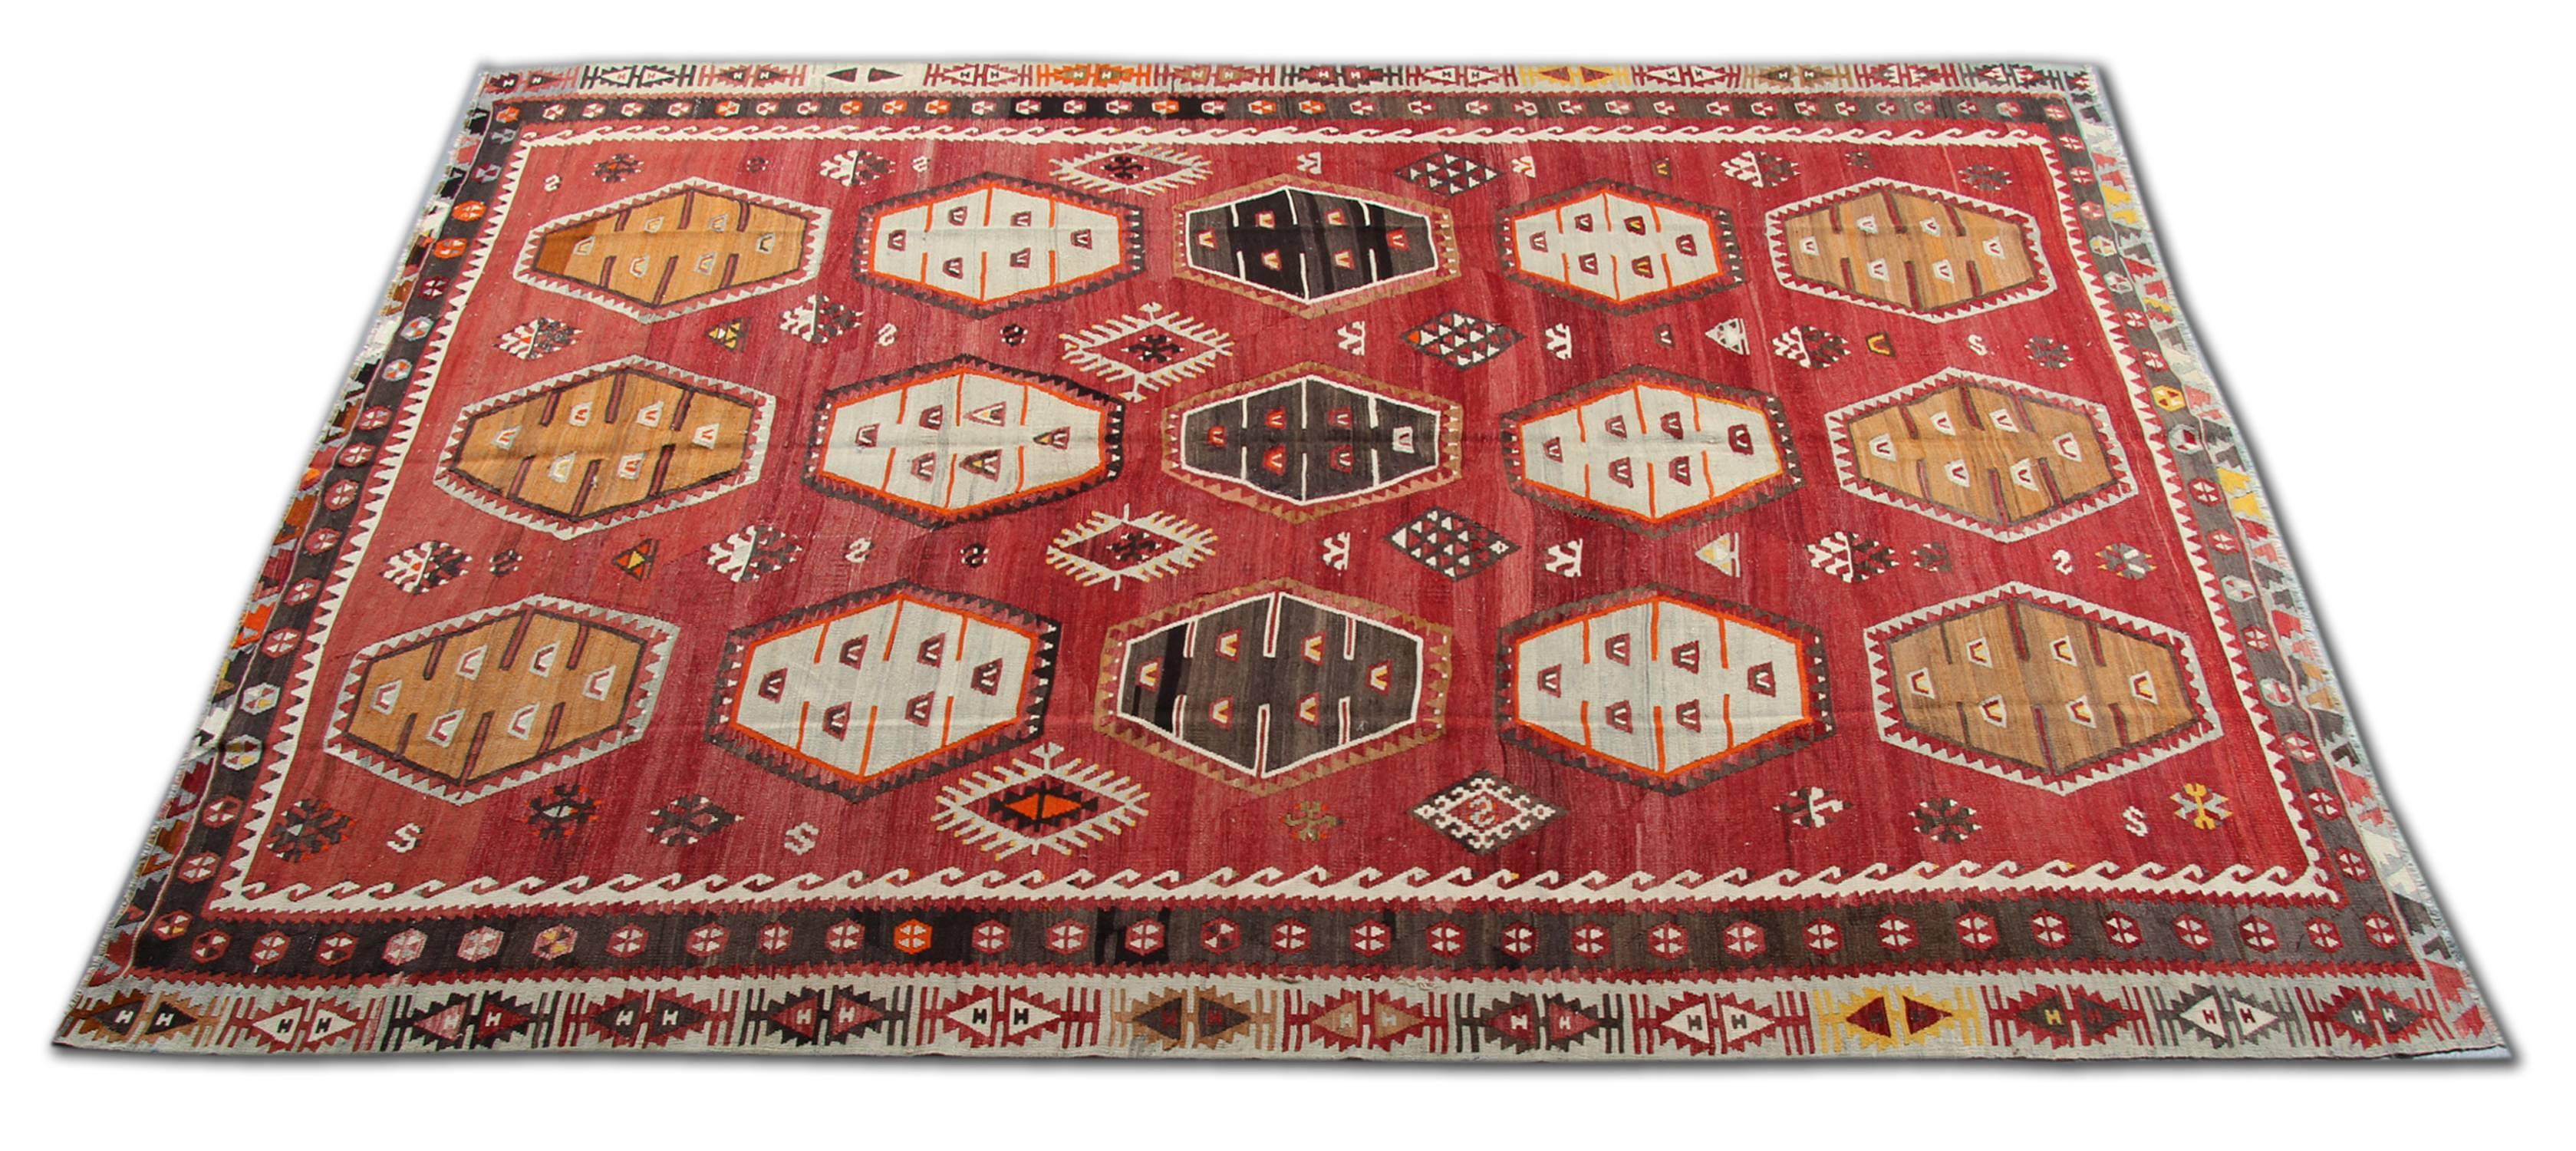 The Sarkisla red rug could enhance the decor and work as a living room or dining room rugs. The geometric floor rug and its bold design can be most appropriate for a bedroom rug. Red rugs are one of the most decorative rugs; Turkish Kilim can be an